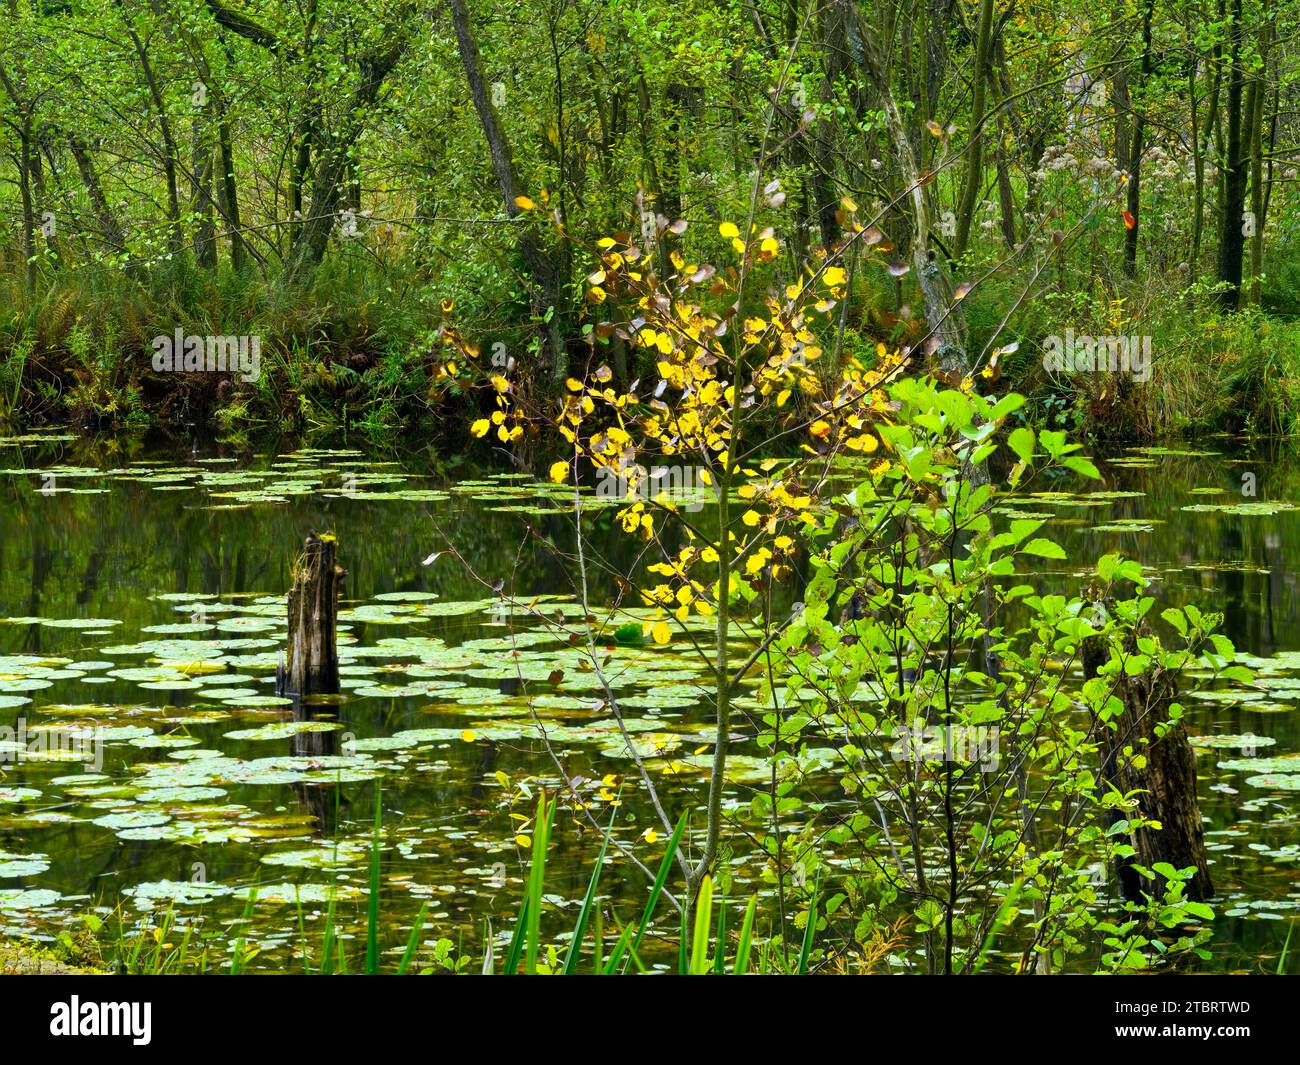 Europe, Germany, Northern Germany, Mecklenburg-Western Pomerania, Mecklenburg Lake District, Müritz National Park, Serrahn Beech Forest UNESCO World Heritage Site, Deadwood and water lilies at Schweingartensee lake Stock Photo